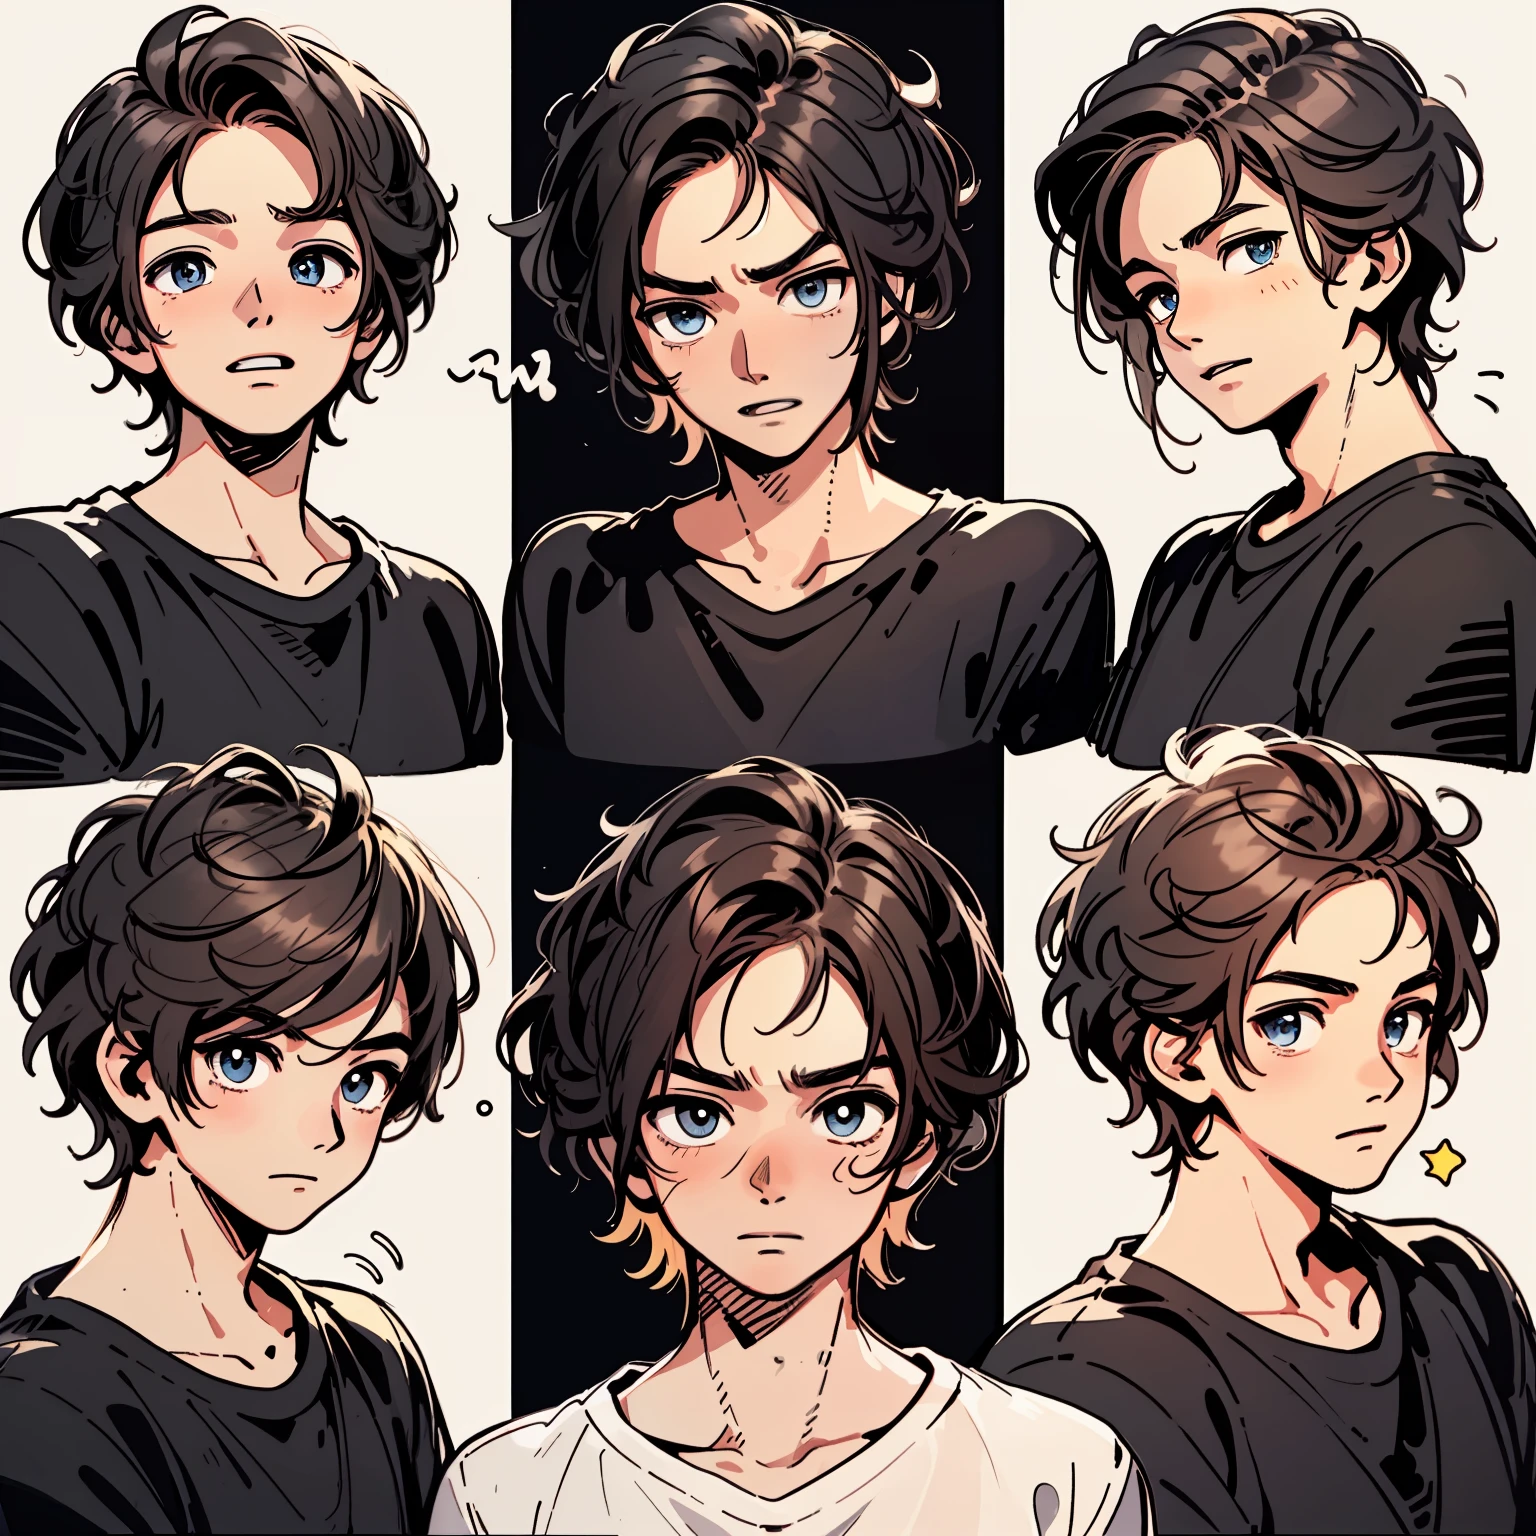 Draw 9 grid images of handsome adult male black strokes。There are 9 poses and facial expressions.、Express different emotions。He is a man with a white T-shirt and very short hair。

（translation: Handsome adult male black stroke 9 grid illustration. Requires 9 different poses and facial expressions, Depict different emotions. Men are wearing white T-shirts、hair should be very short.）